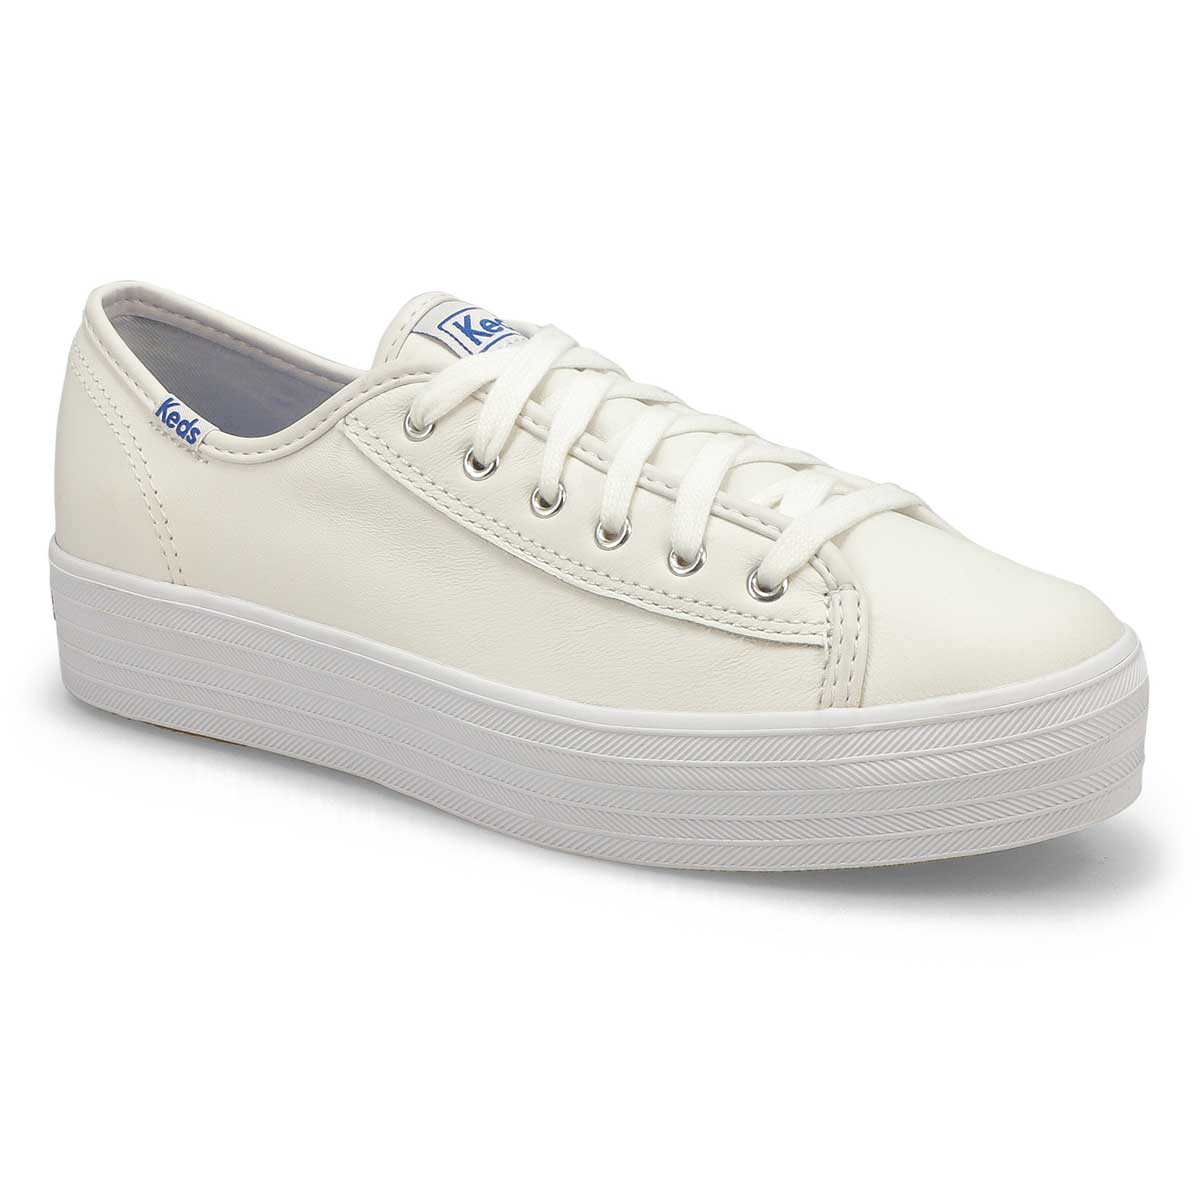 keds shoes leather white